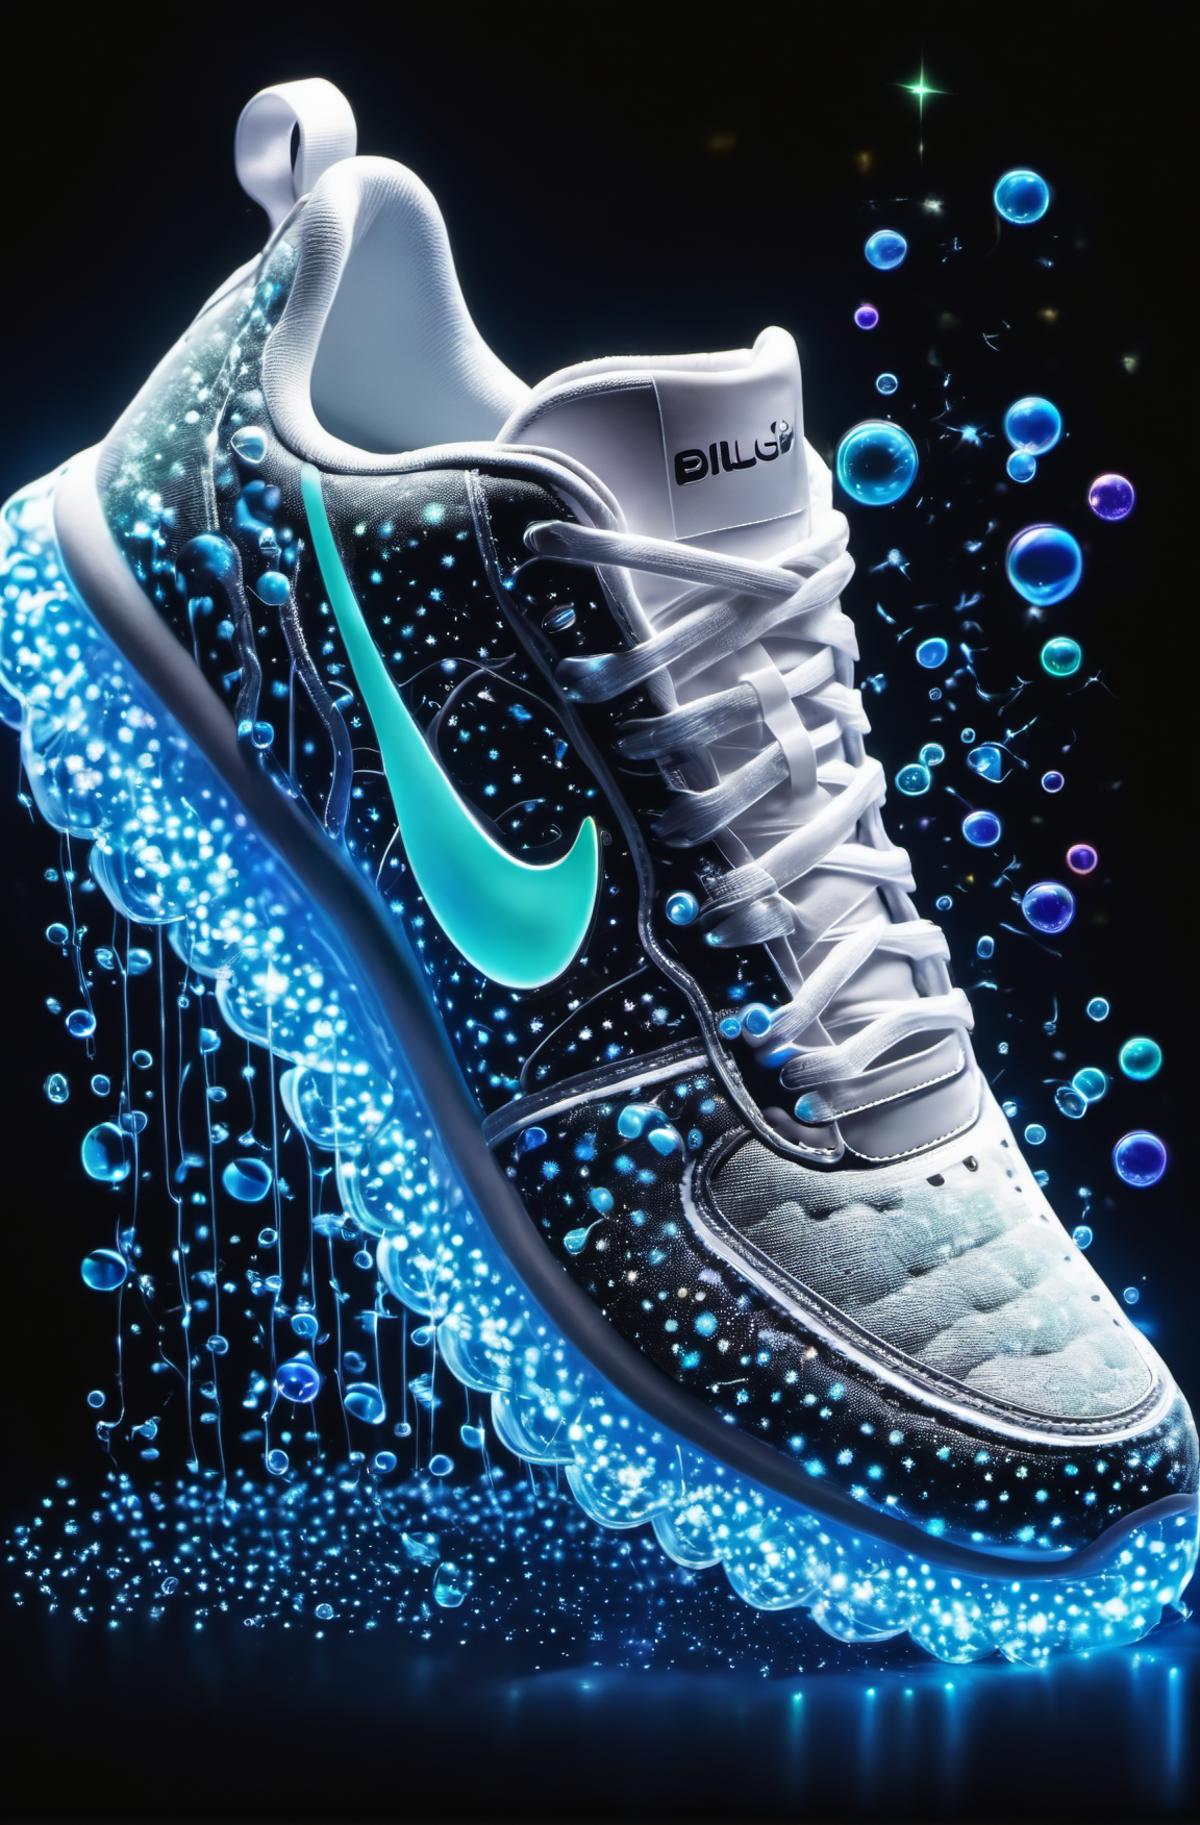 A Nike shoe with a blue lace and a blue and white bubble background.